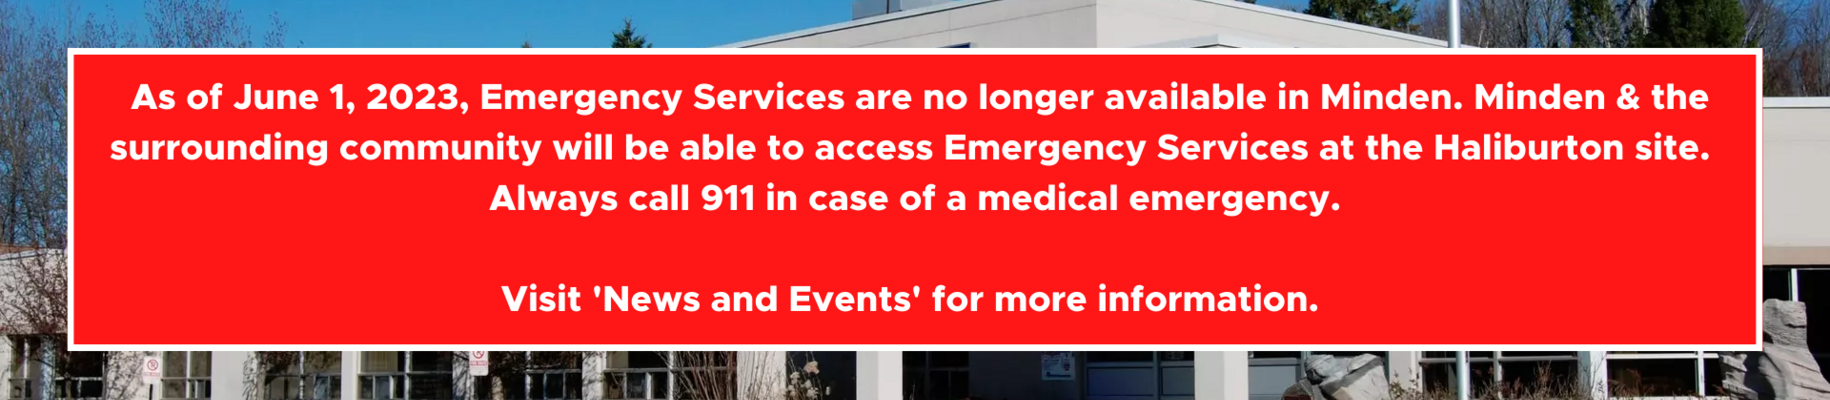 As of June 1, 2023, emergency services are no longer available at the Minden site. Minden and the surrounding communities can access emergency services at the Haliburton site. In case of an emergency, always call 911. More information is available in the News and Events section of this website. 